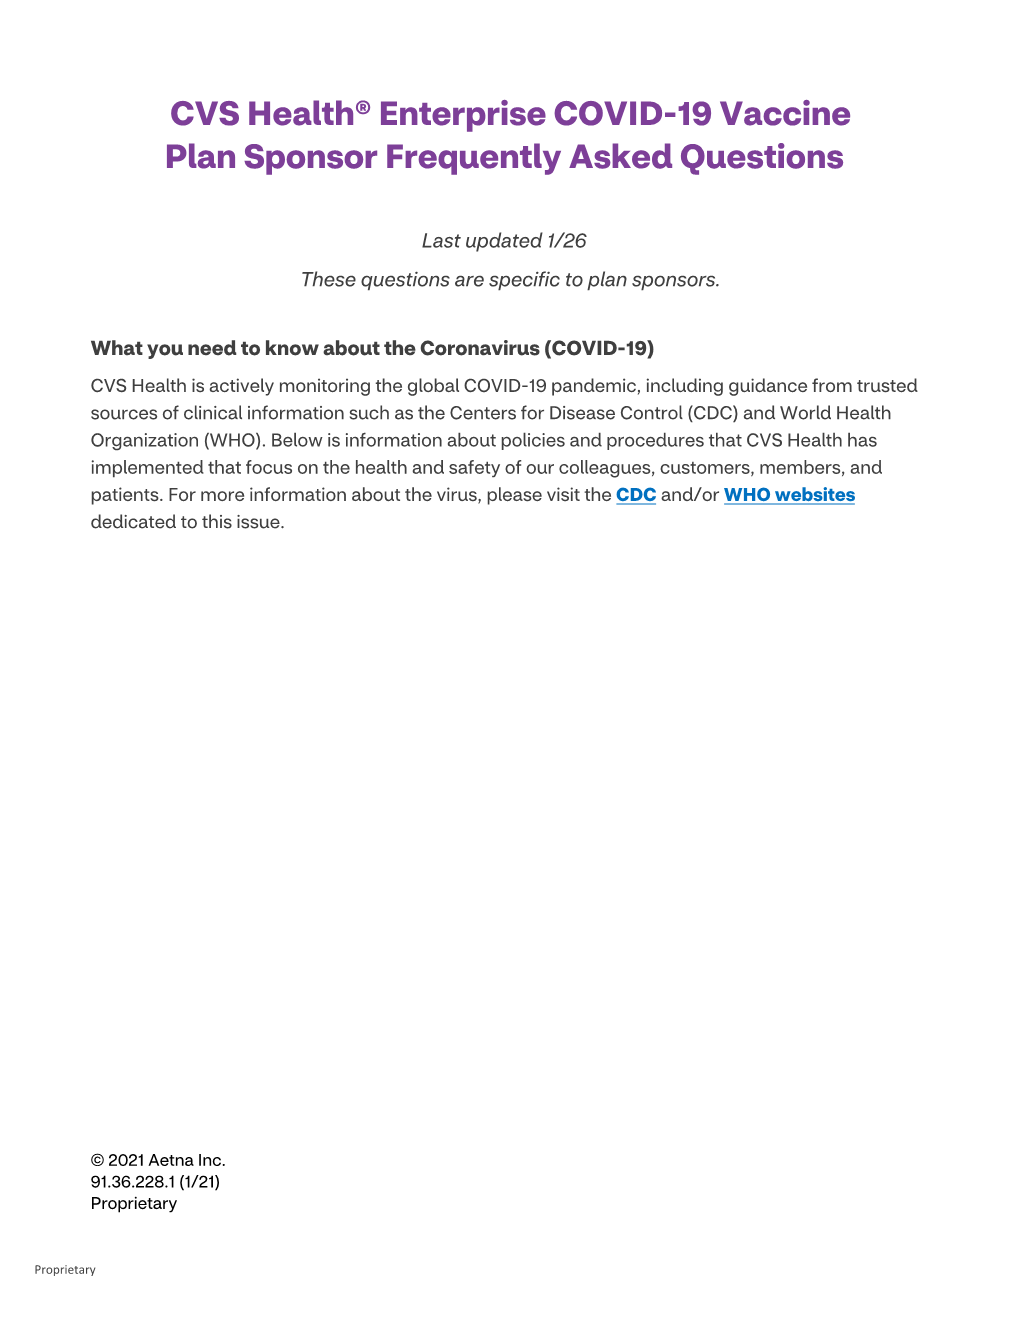 CVS Health® Enterprise COVID-19 Vaccine Frequently Asked Questions